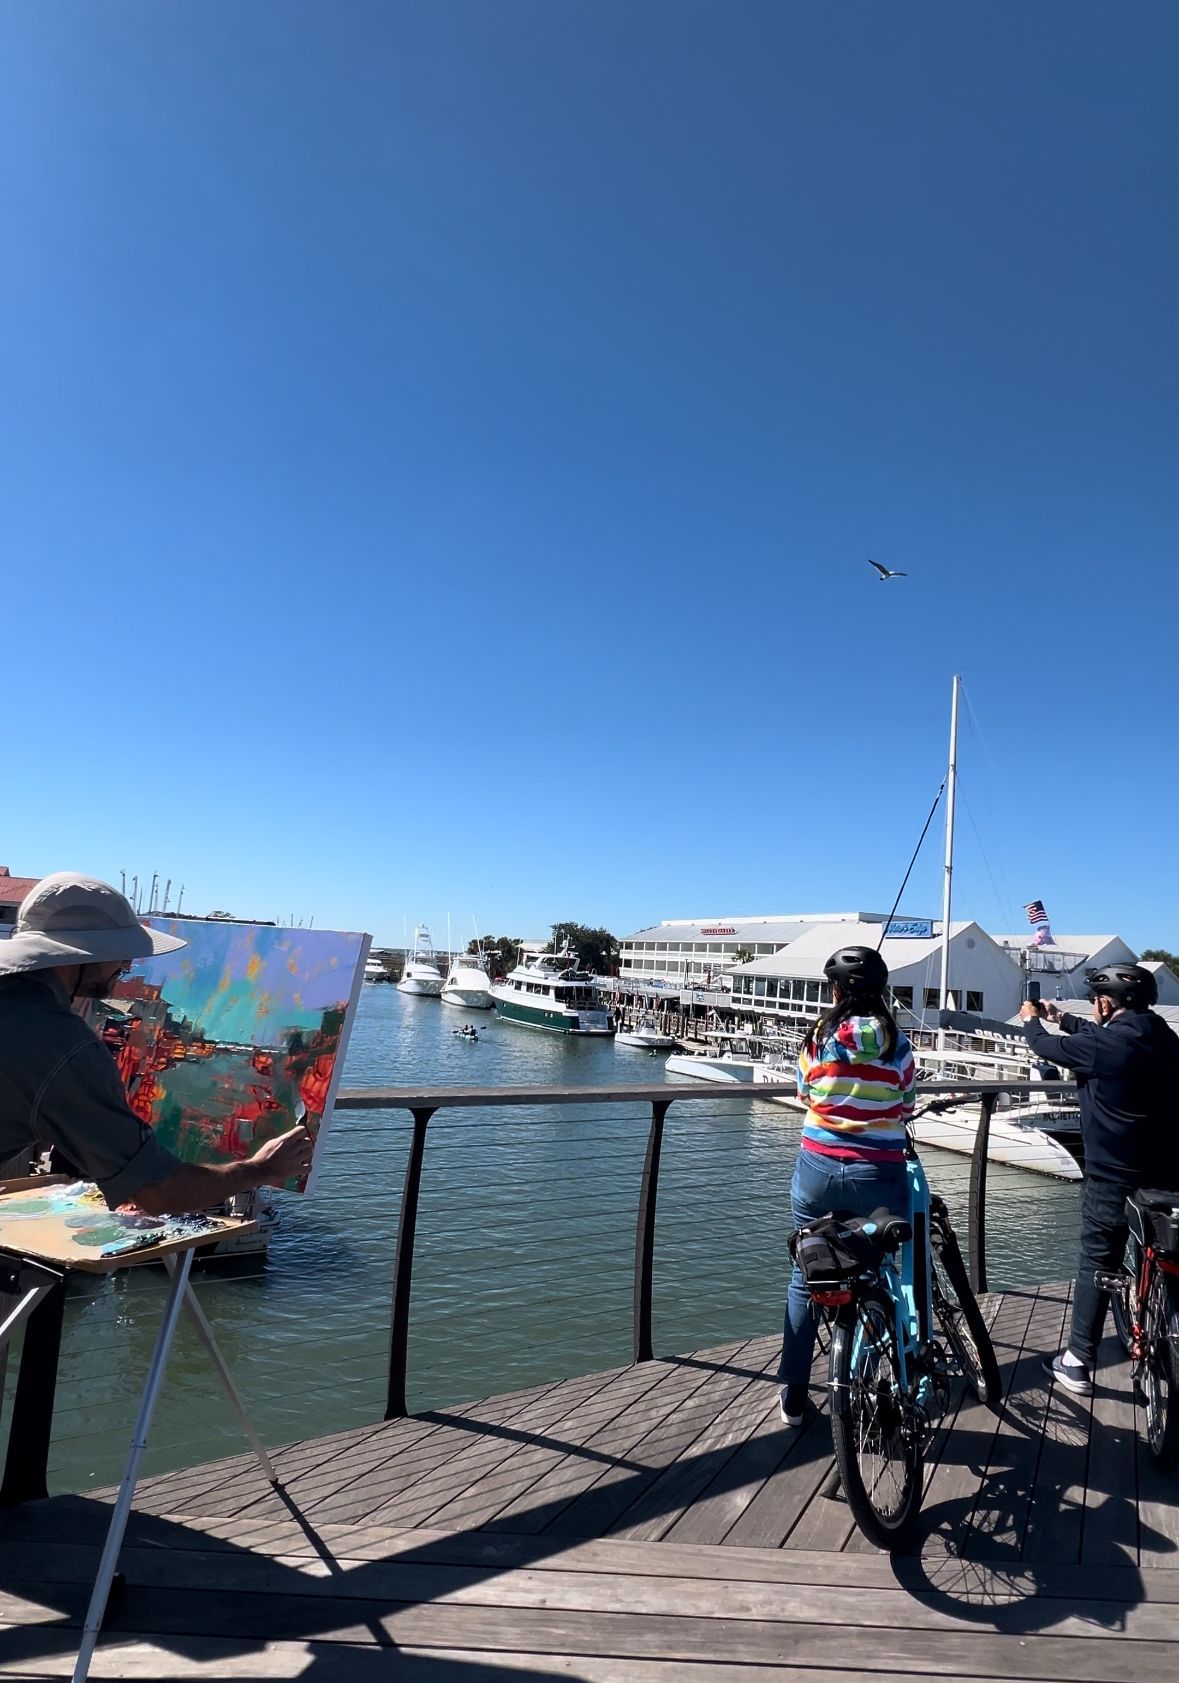 a man is painting on a canvas while a woman is riding a bike on a dock .